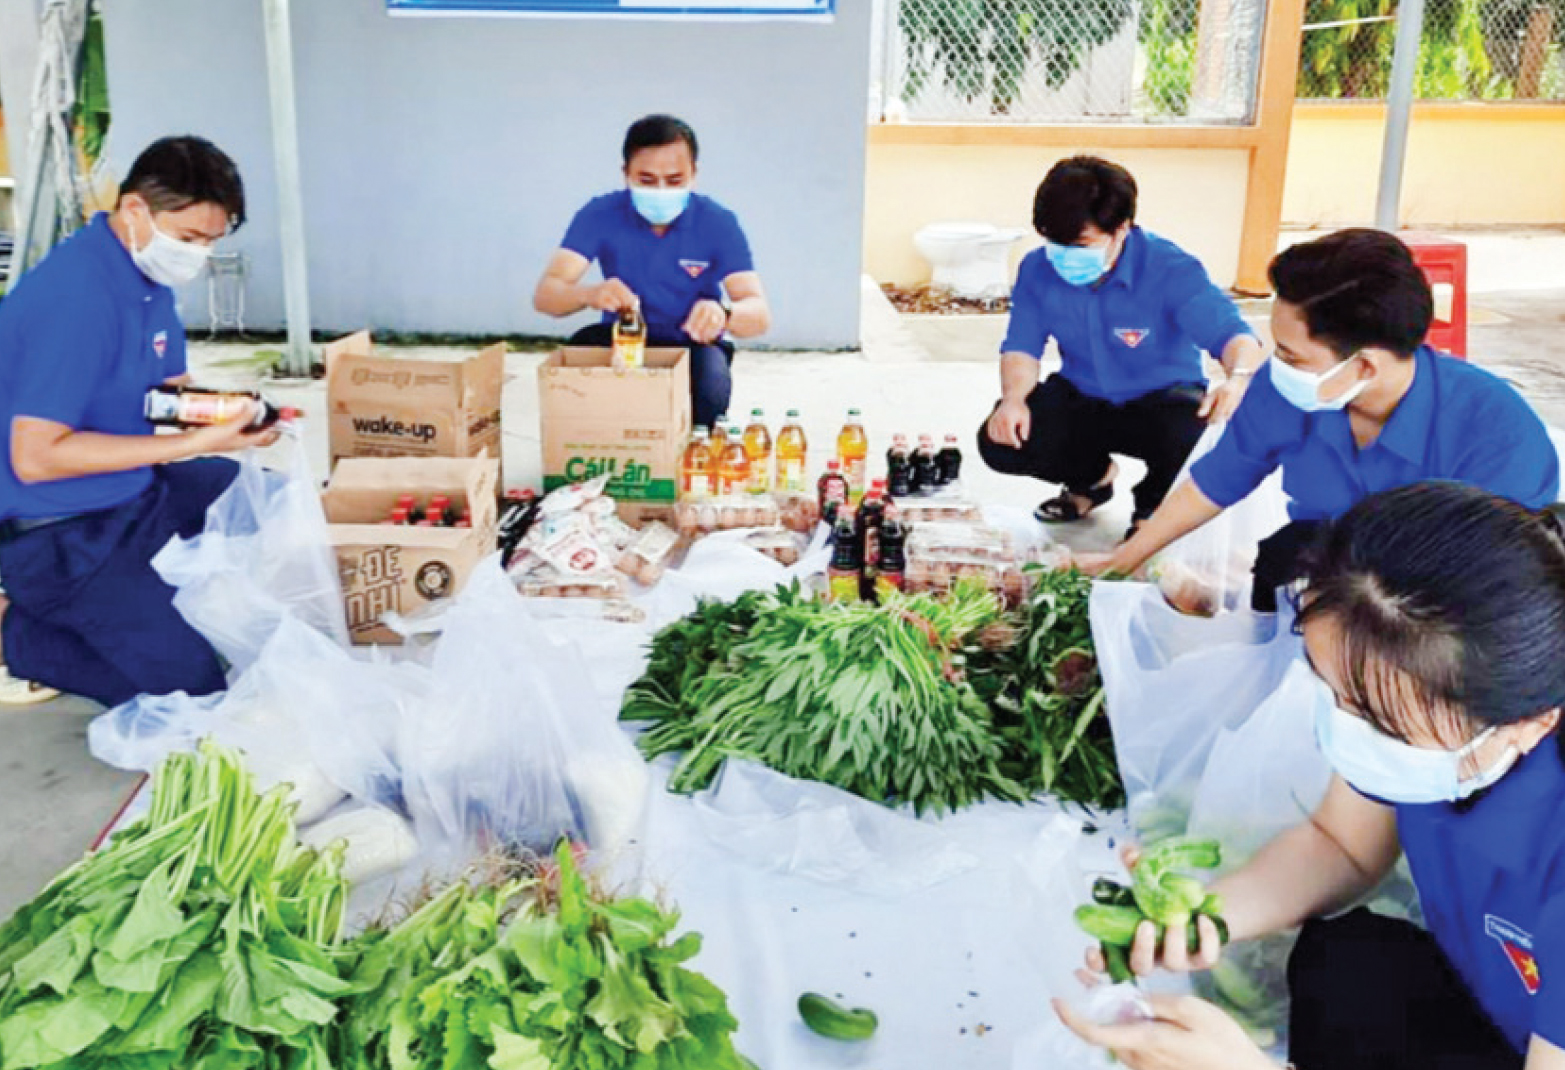 During the epidemic, union members and young people in the communes have many meaningful activities and jobs such as giving vegetables, tubers and fruits to people